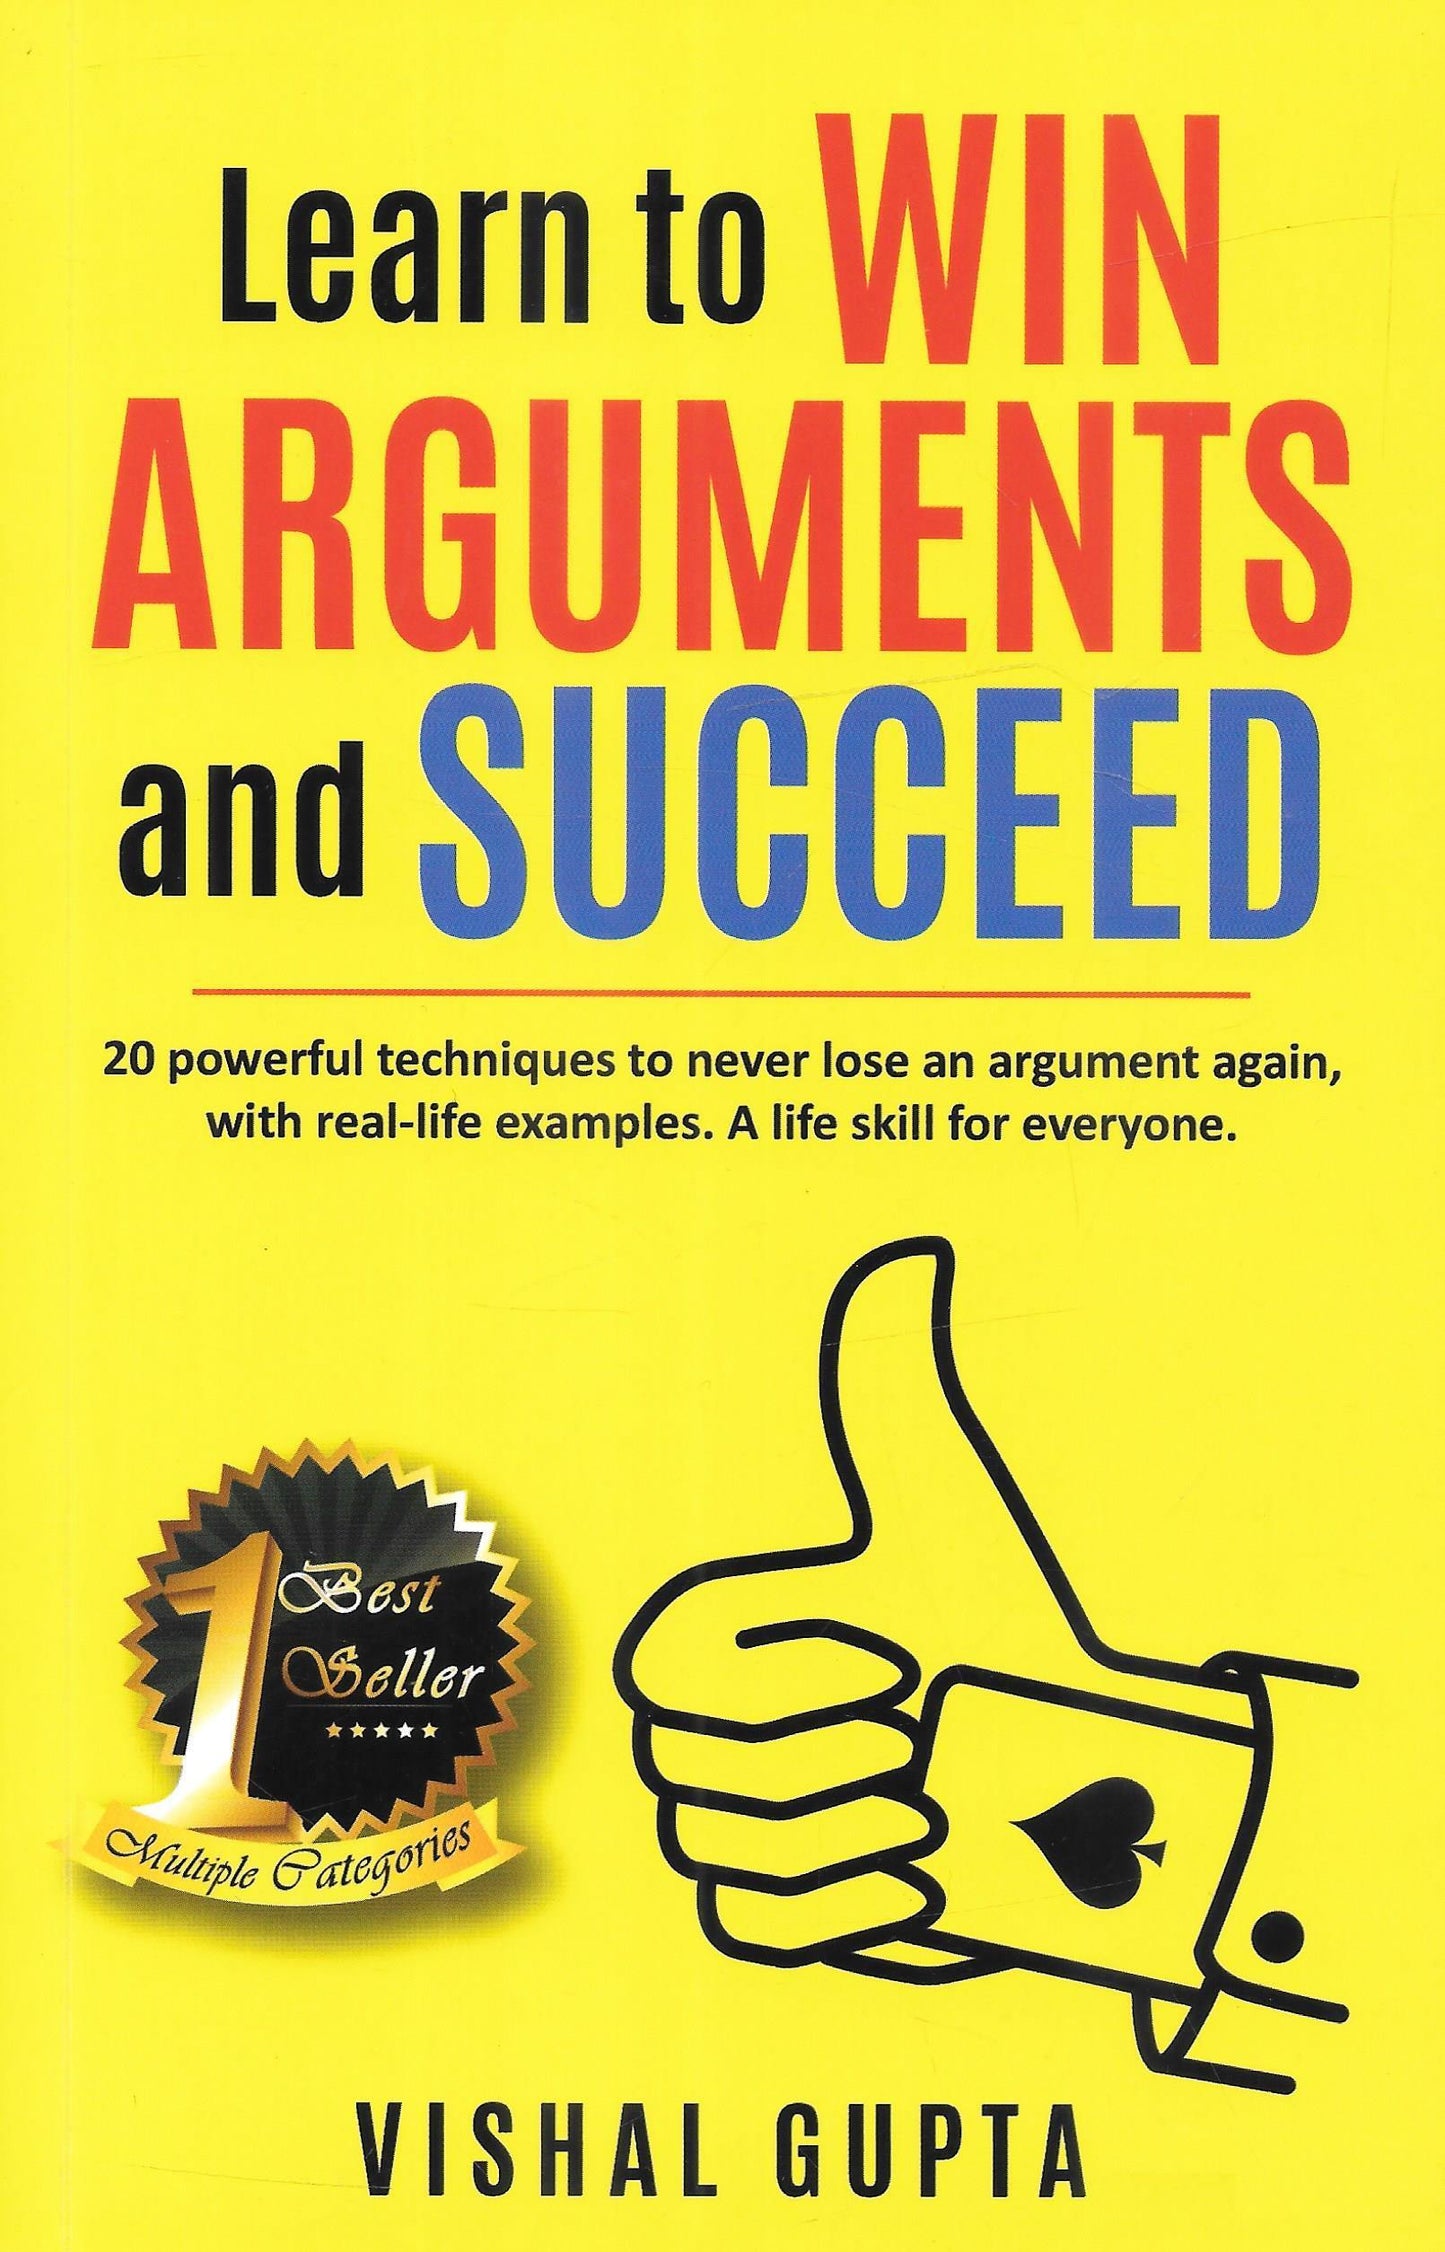 Learn to Win Arguments and Succeed - 20 Powerful Techniques to Never Lose an Argument again, with Real-Life Examples. A life Skill for everyone.